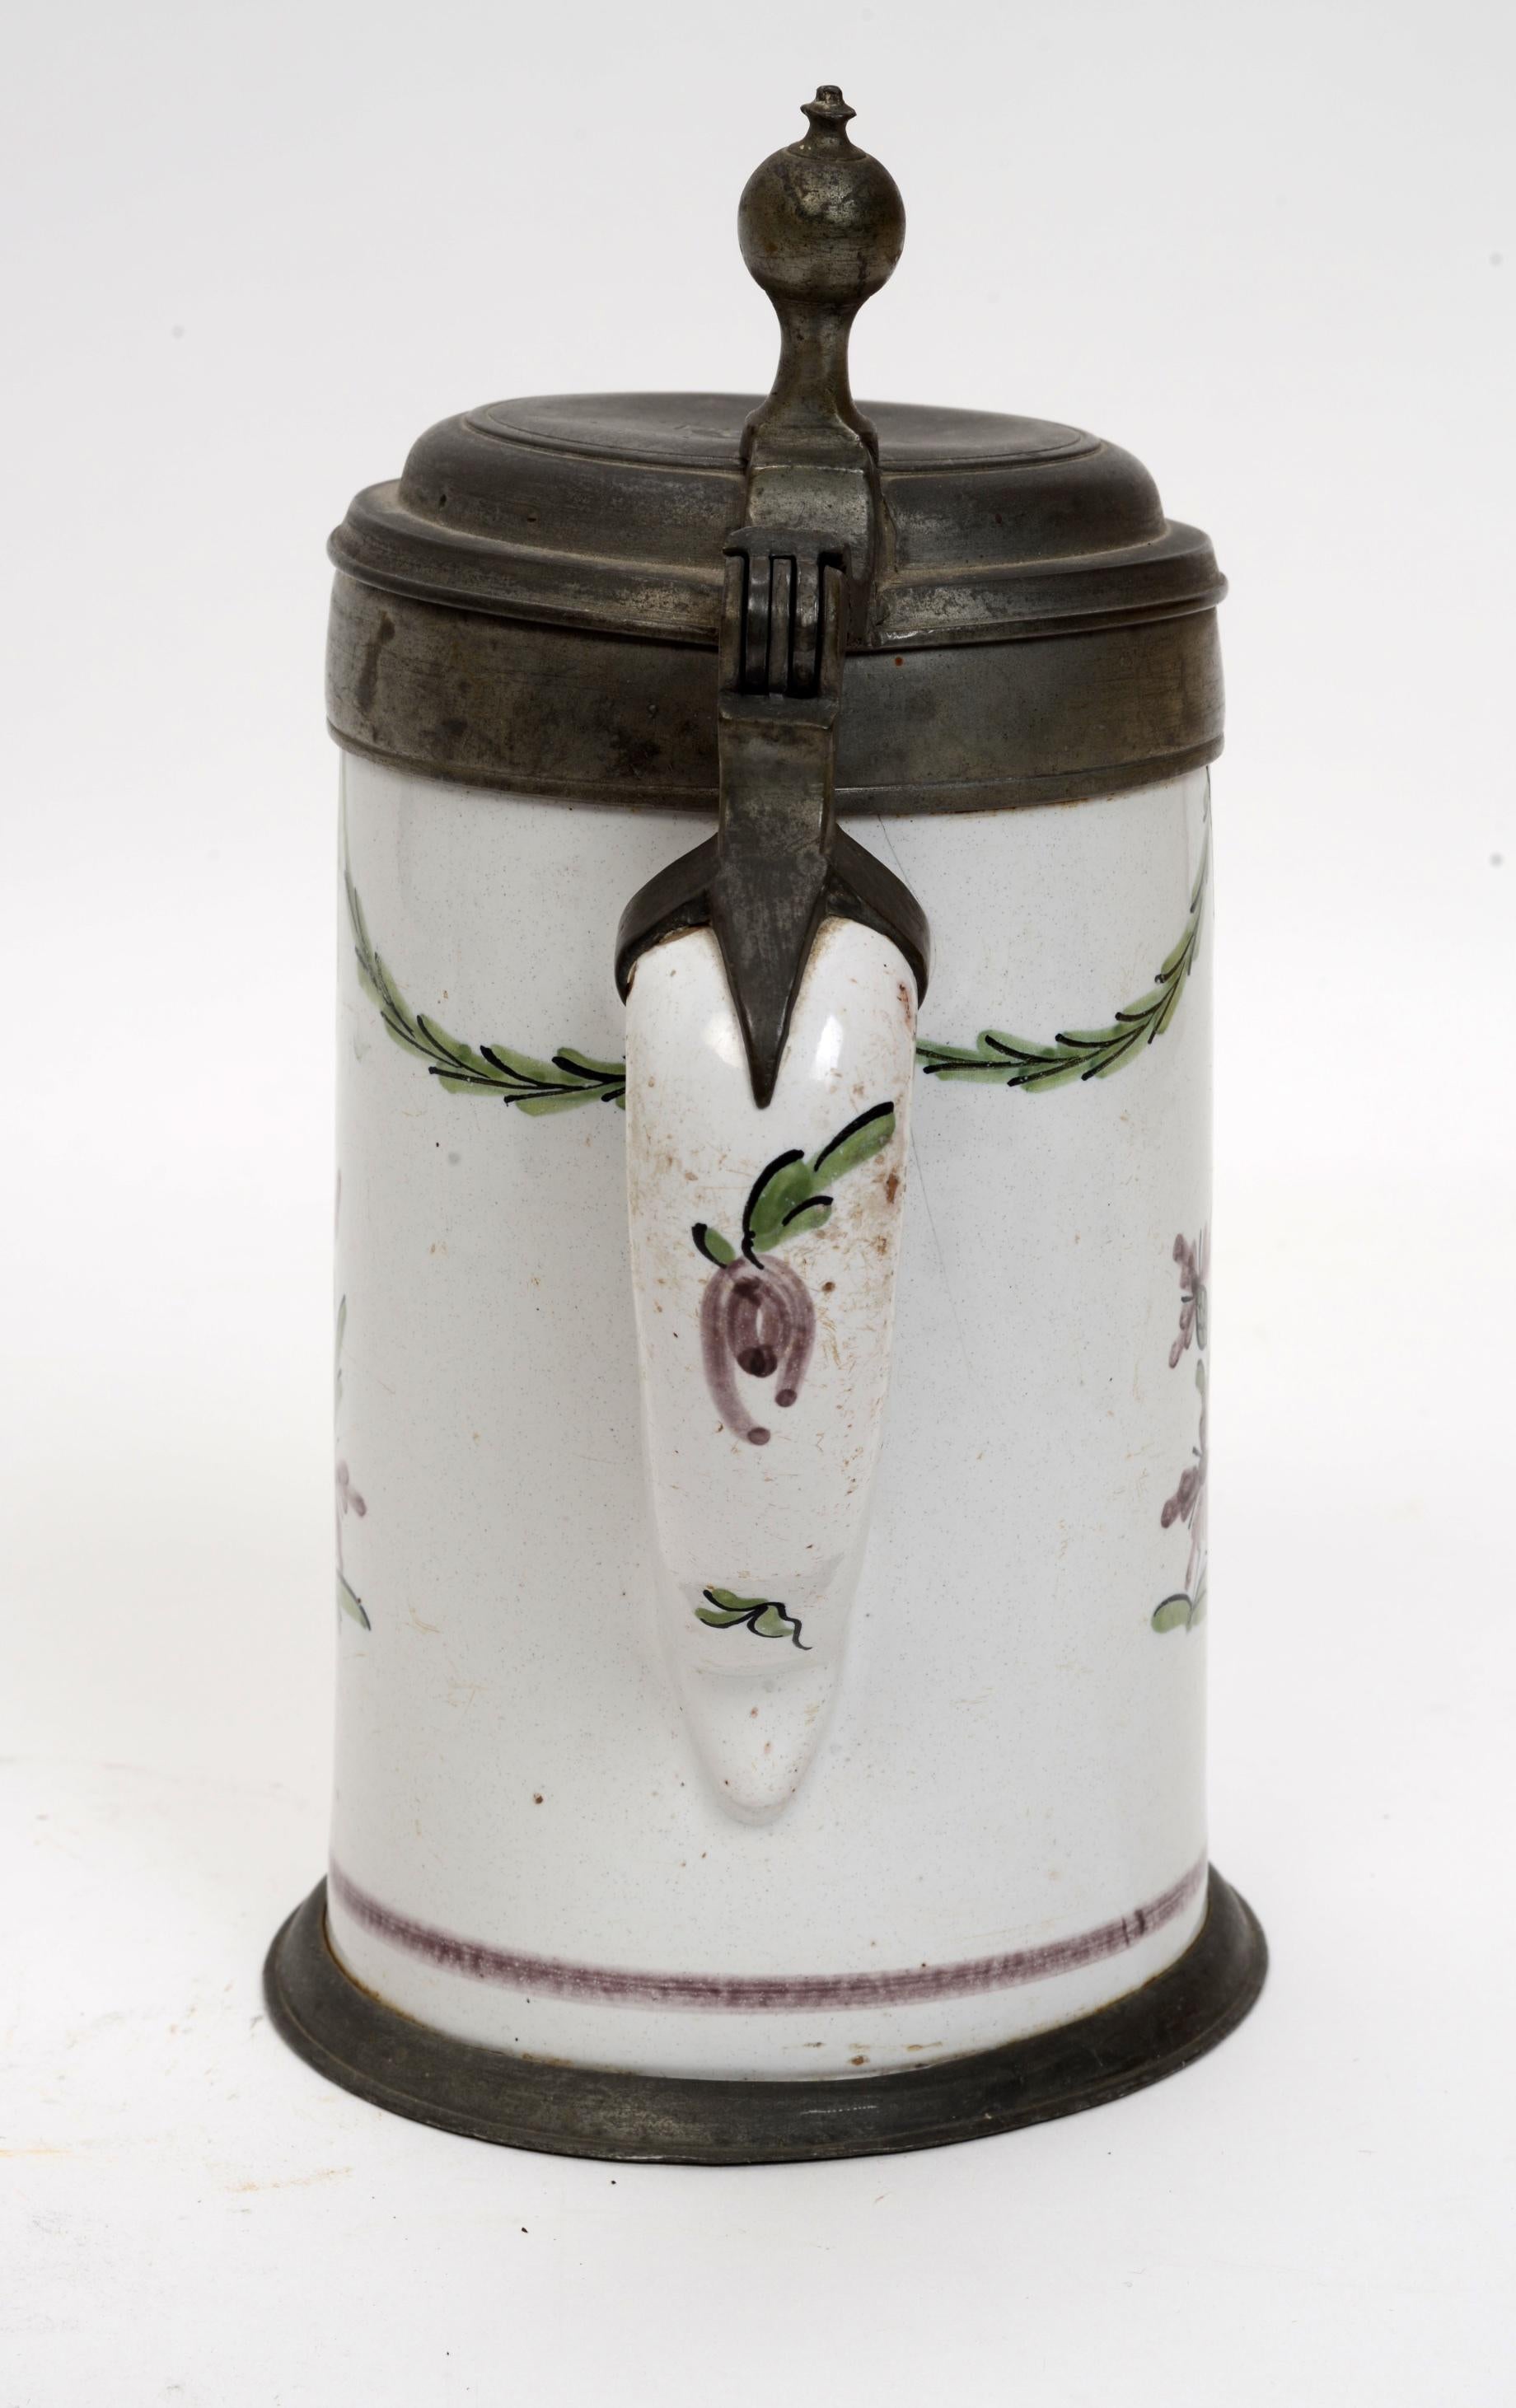 An 18th century German Pewter Mounted Faience Stein Initialed 